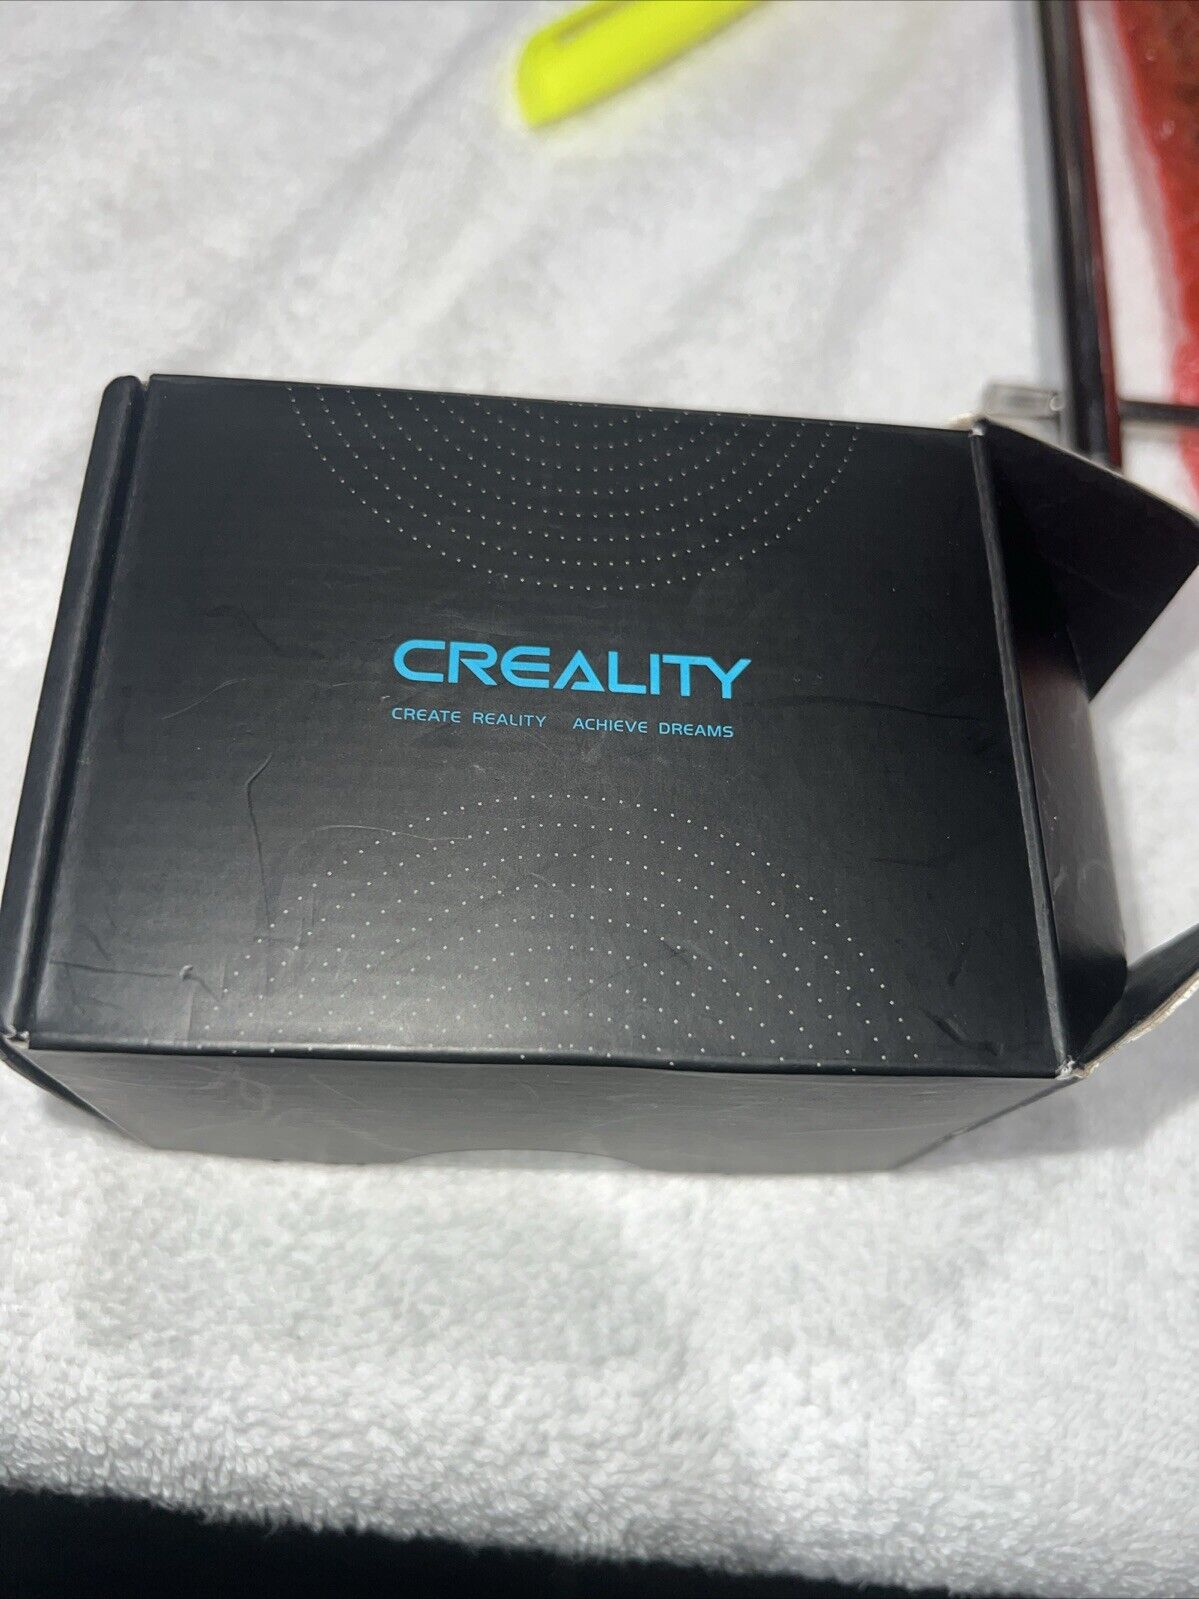 Creality Official K1 Extruder, All Metal Feeding Extruder with 50N Stepper Motor